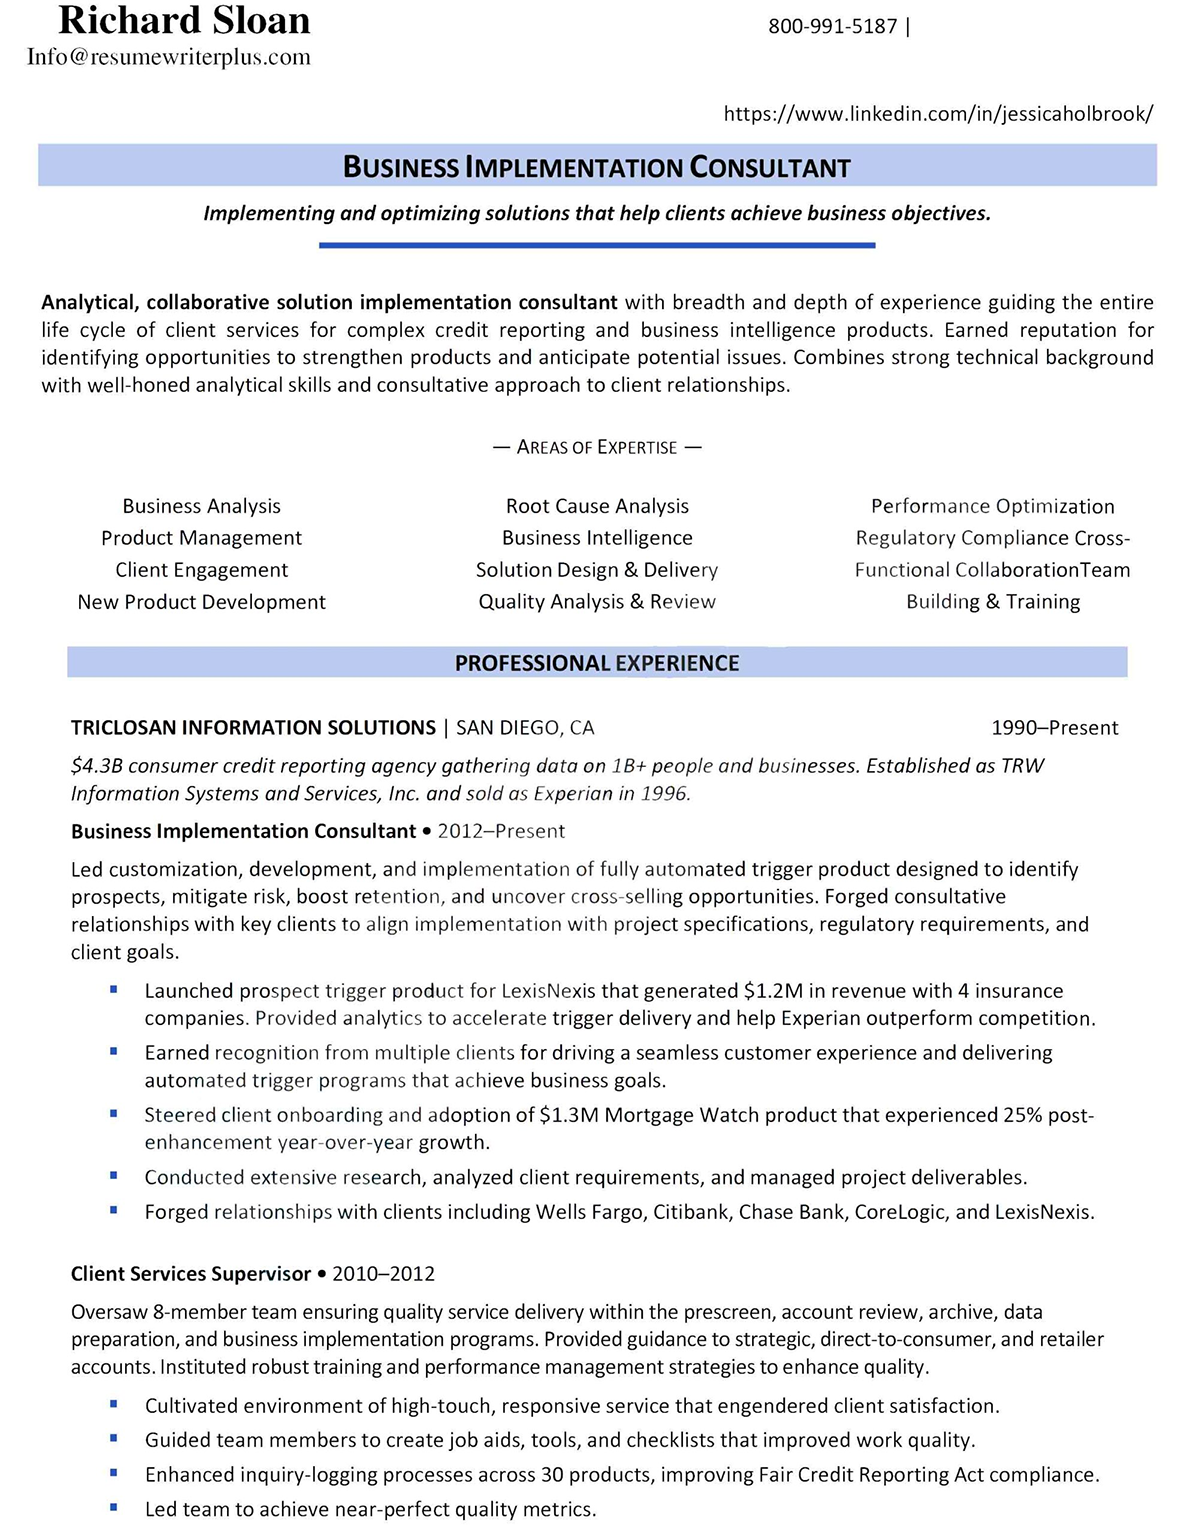 Business-Implementation-Consultant-Resume-1